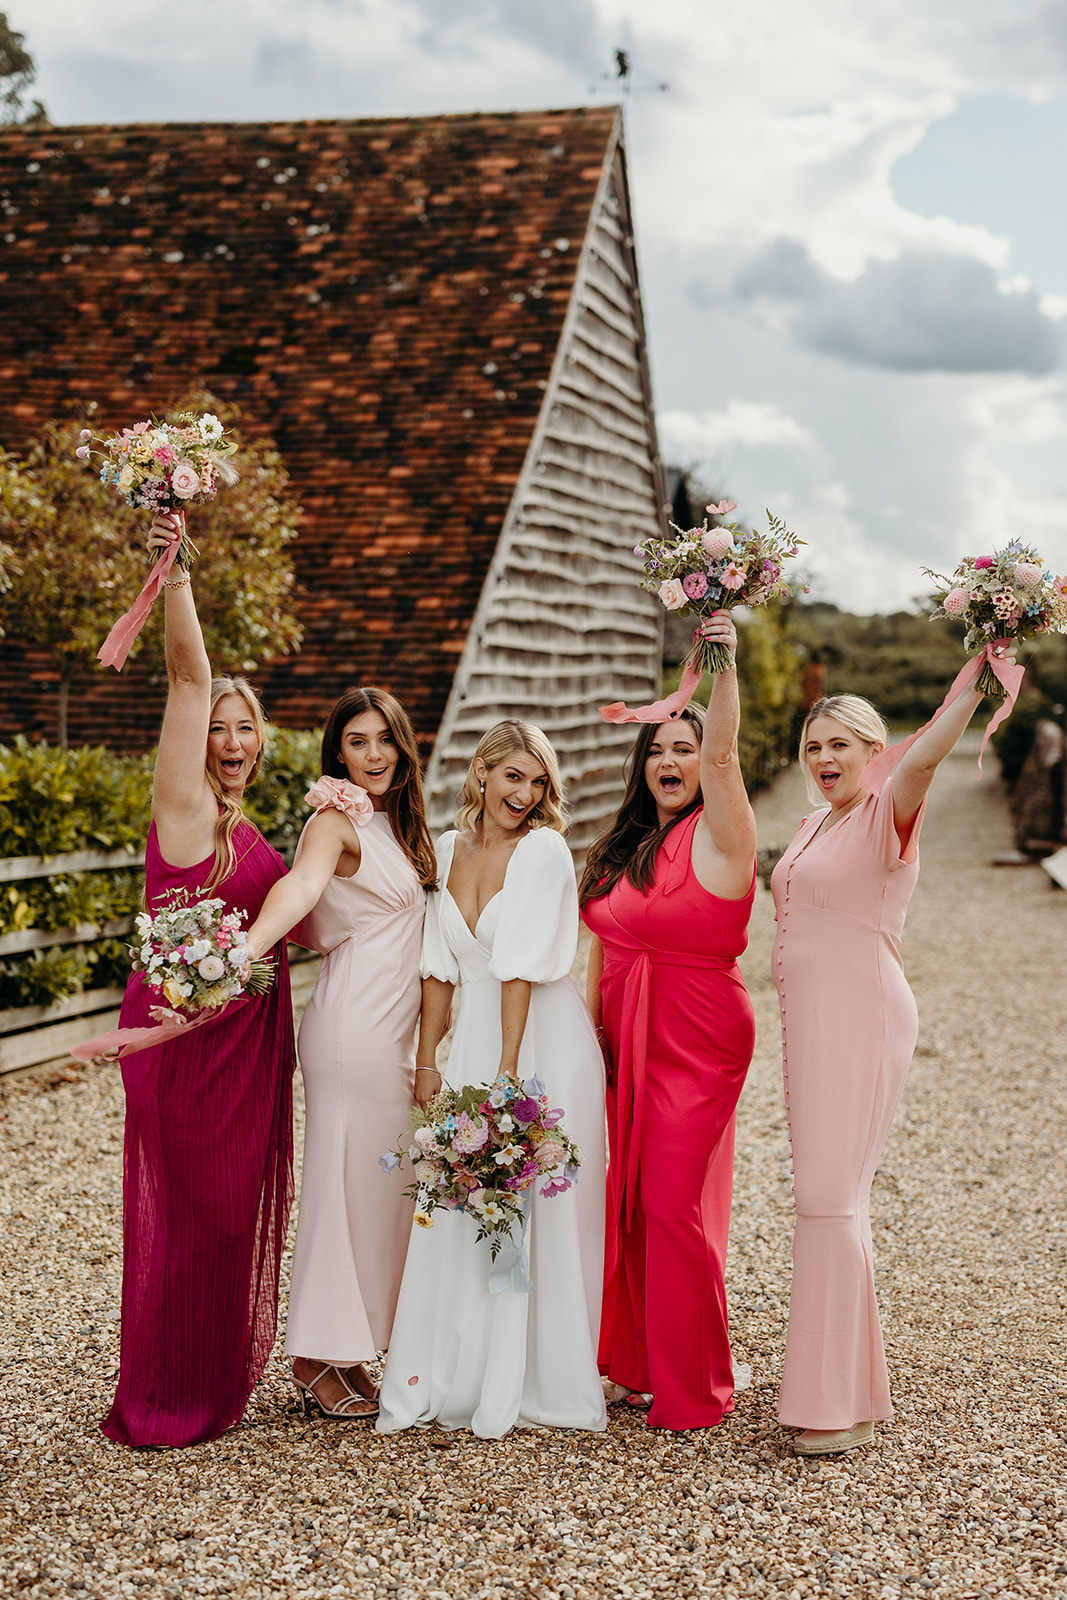 Bride with Bridesmaids posing with flowers up in the air